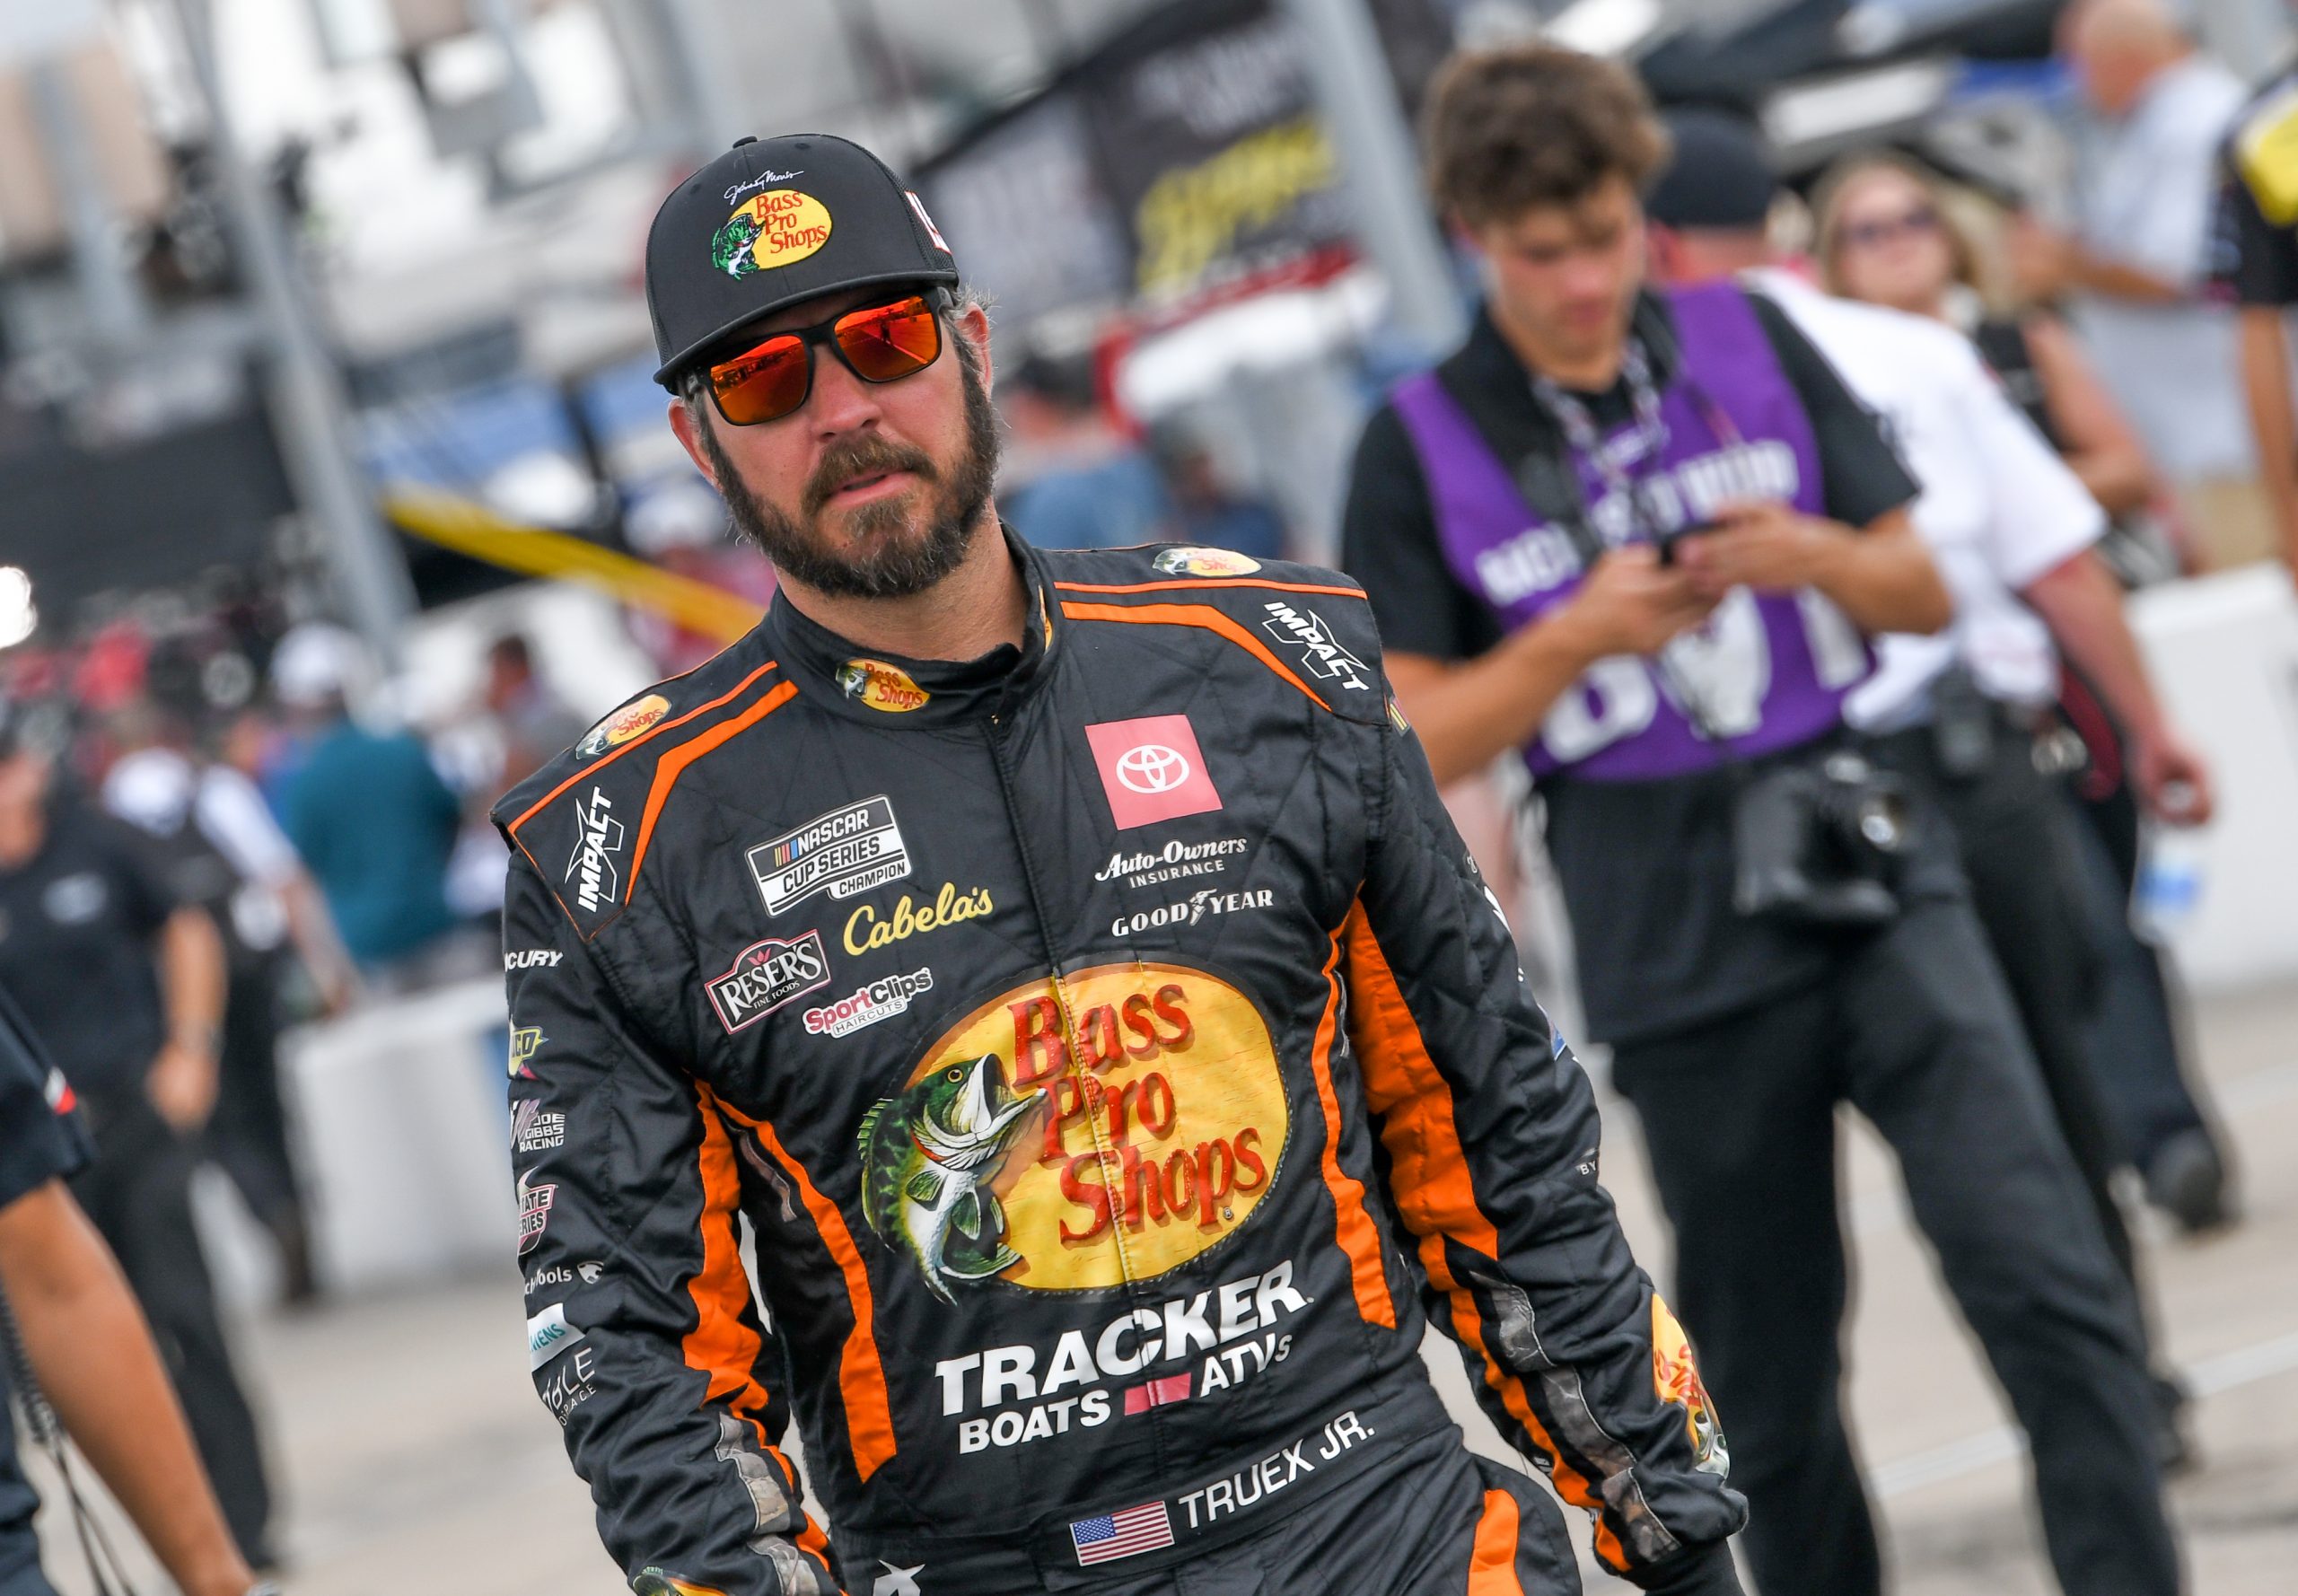 Martin Truex Jr. is solely focused on excelling for his No. 19 team. (Photo: Kevin Ritchie | The Podium Finish)